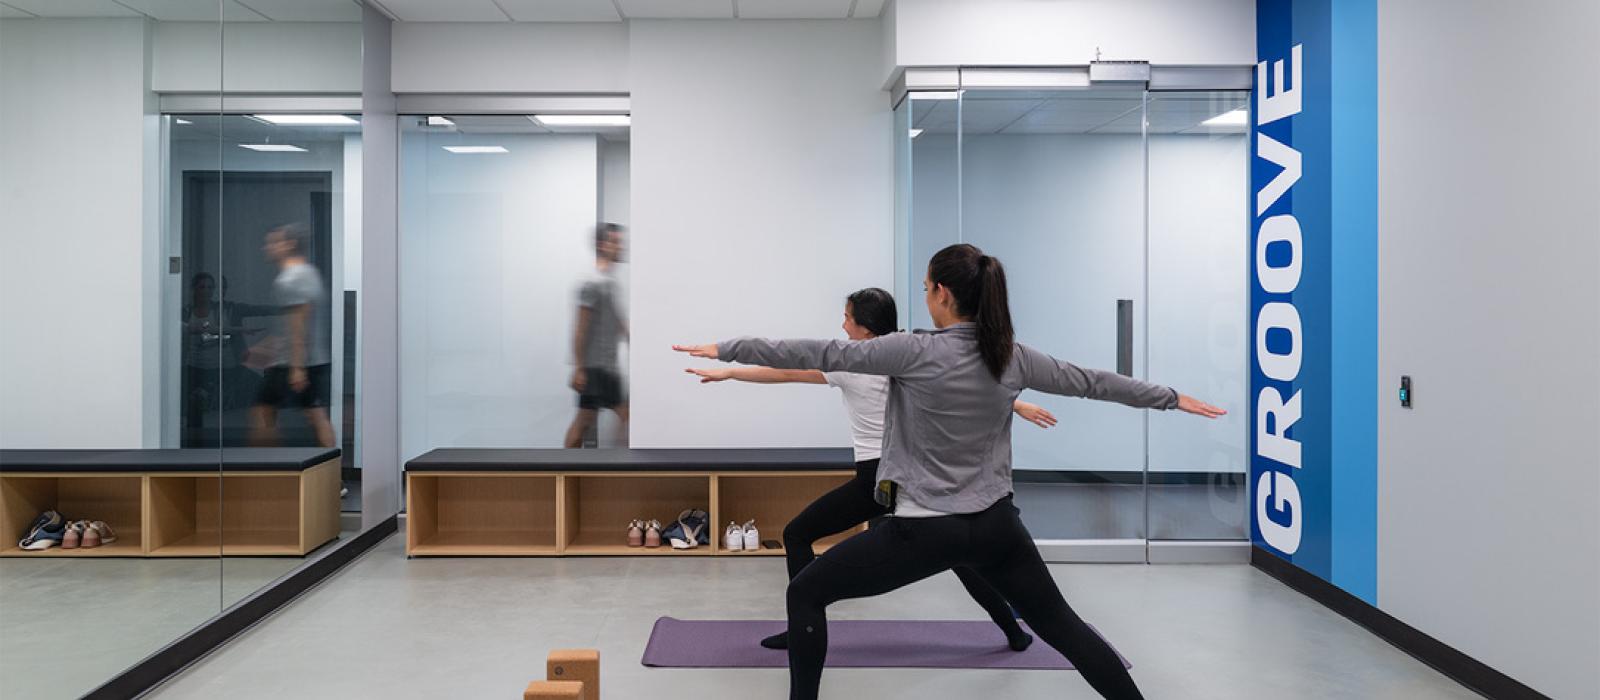 Two young women doing a yoga pose in an exercise room. The word Groove is edged on the wall.